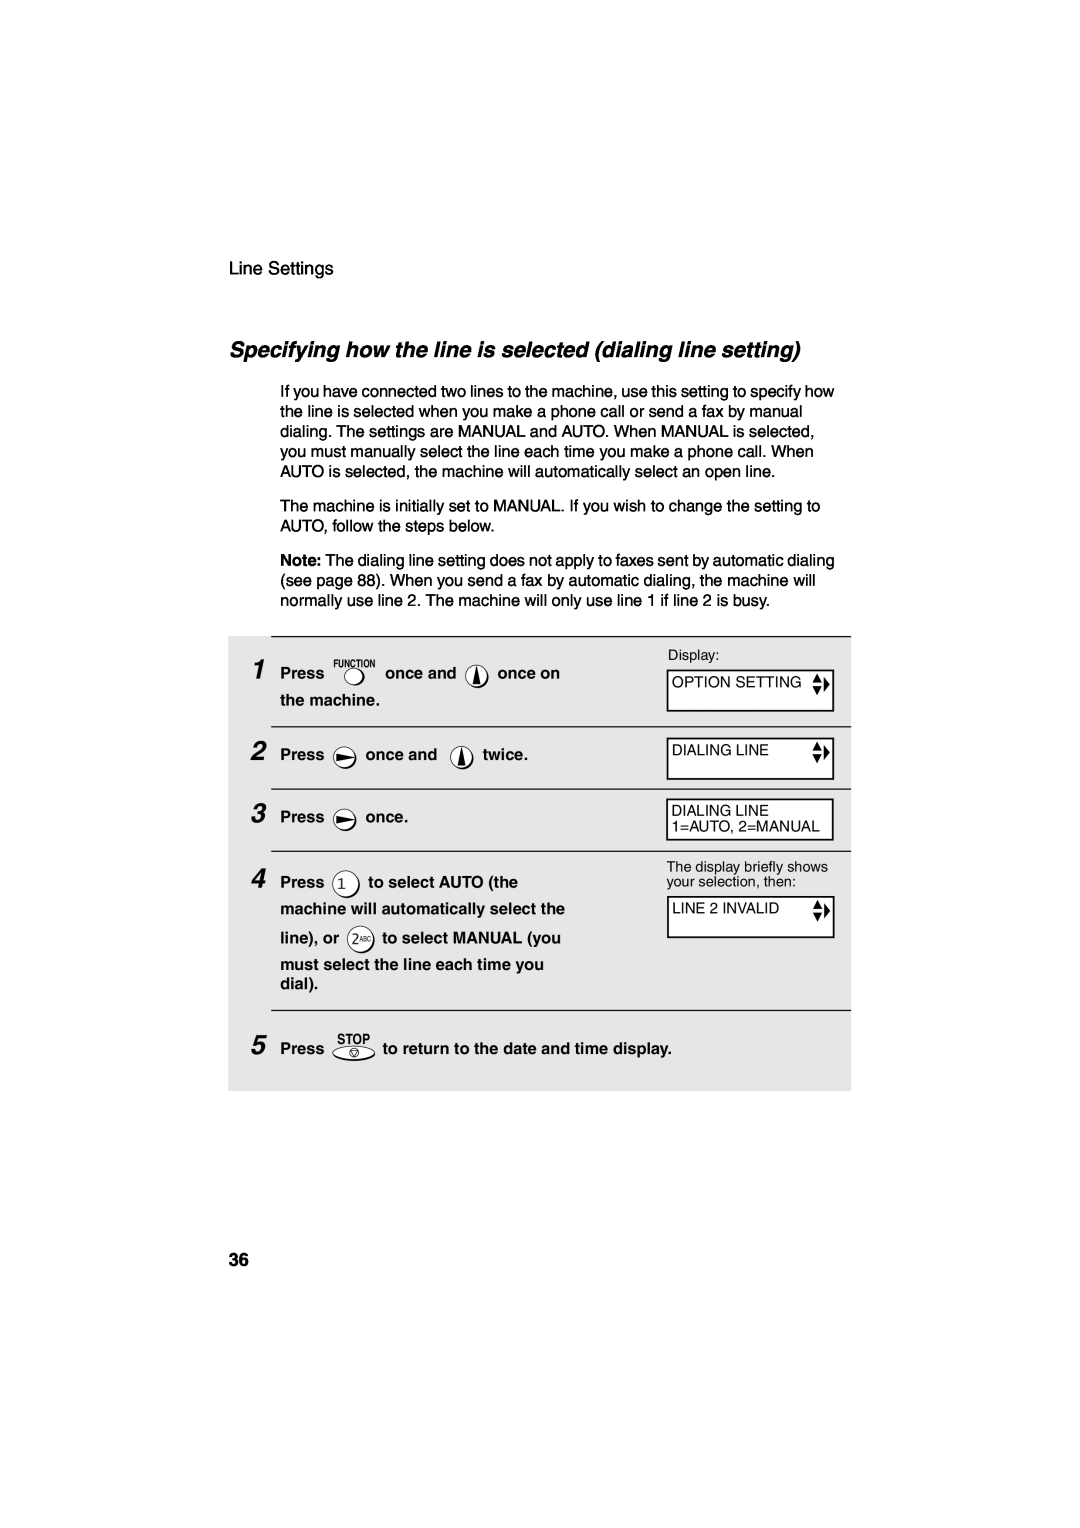 Sharp UX-CD600 operation manual Specifying how the line is selected dialing line setting, Stop 